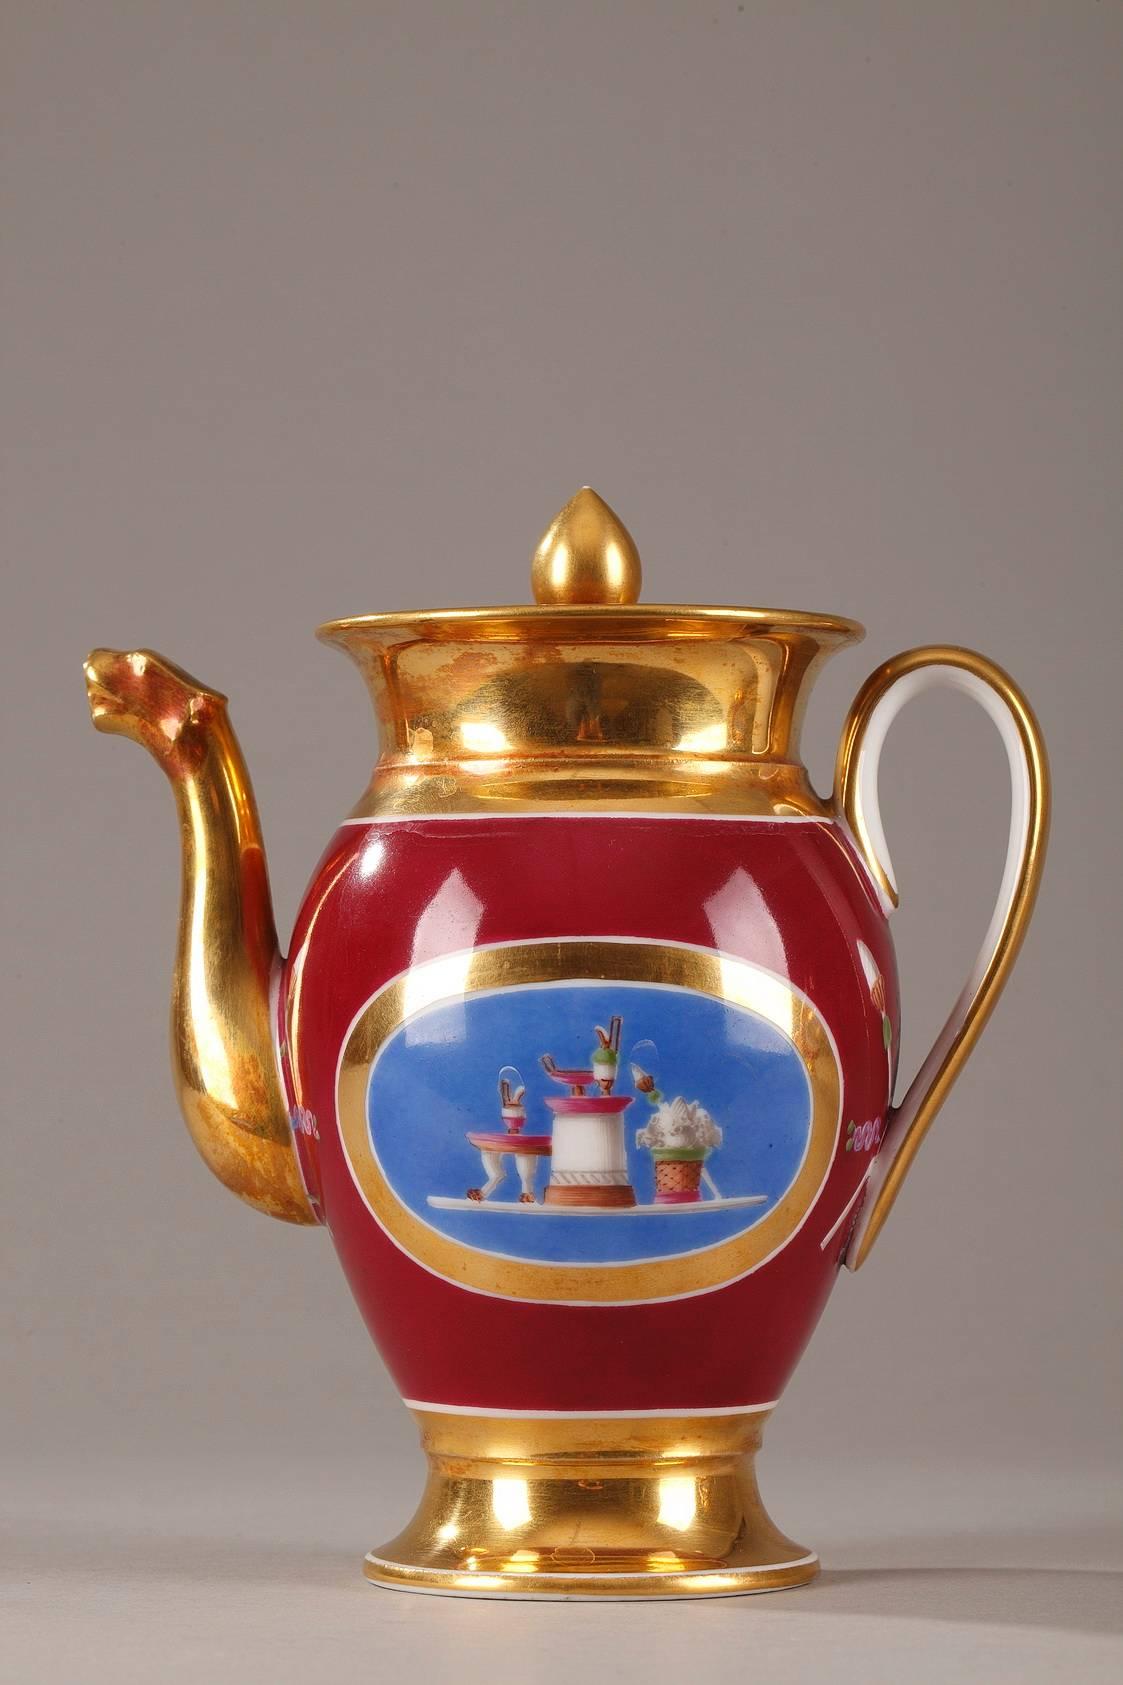 Empire porcelain set composed of a coffee pot and a pitcher for hot milk. They are decorated with medallions featuring musical and revolutionary motifs. Gold trim surrounds the medallions, which are set in a wine red, lie de vin background,
